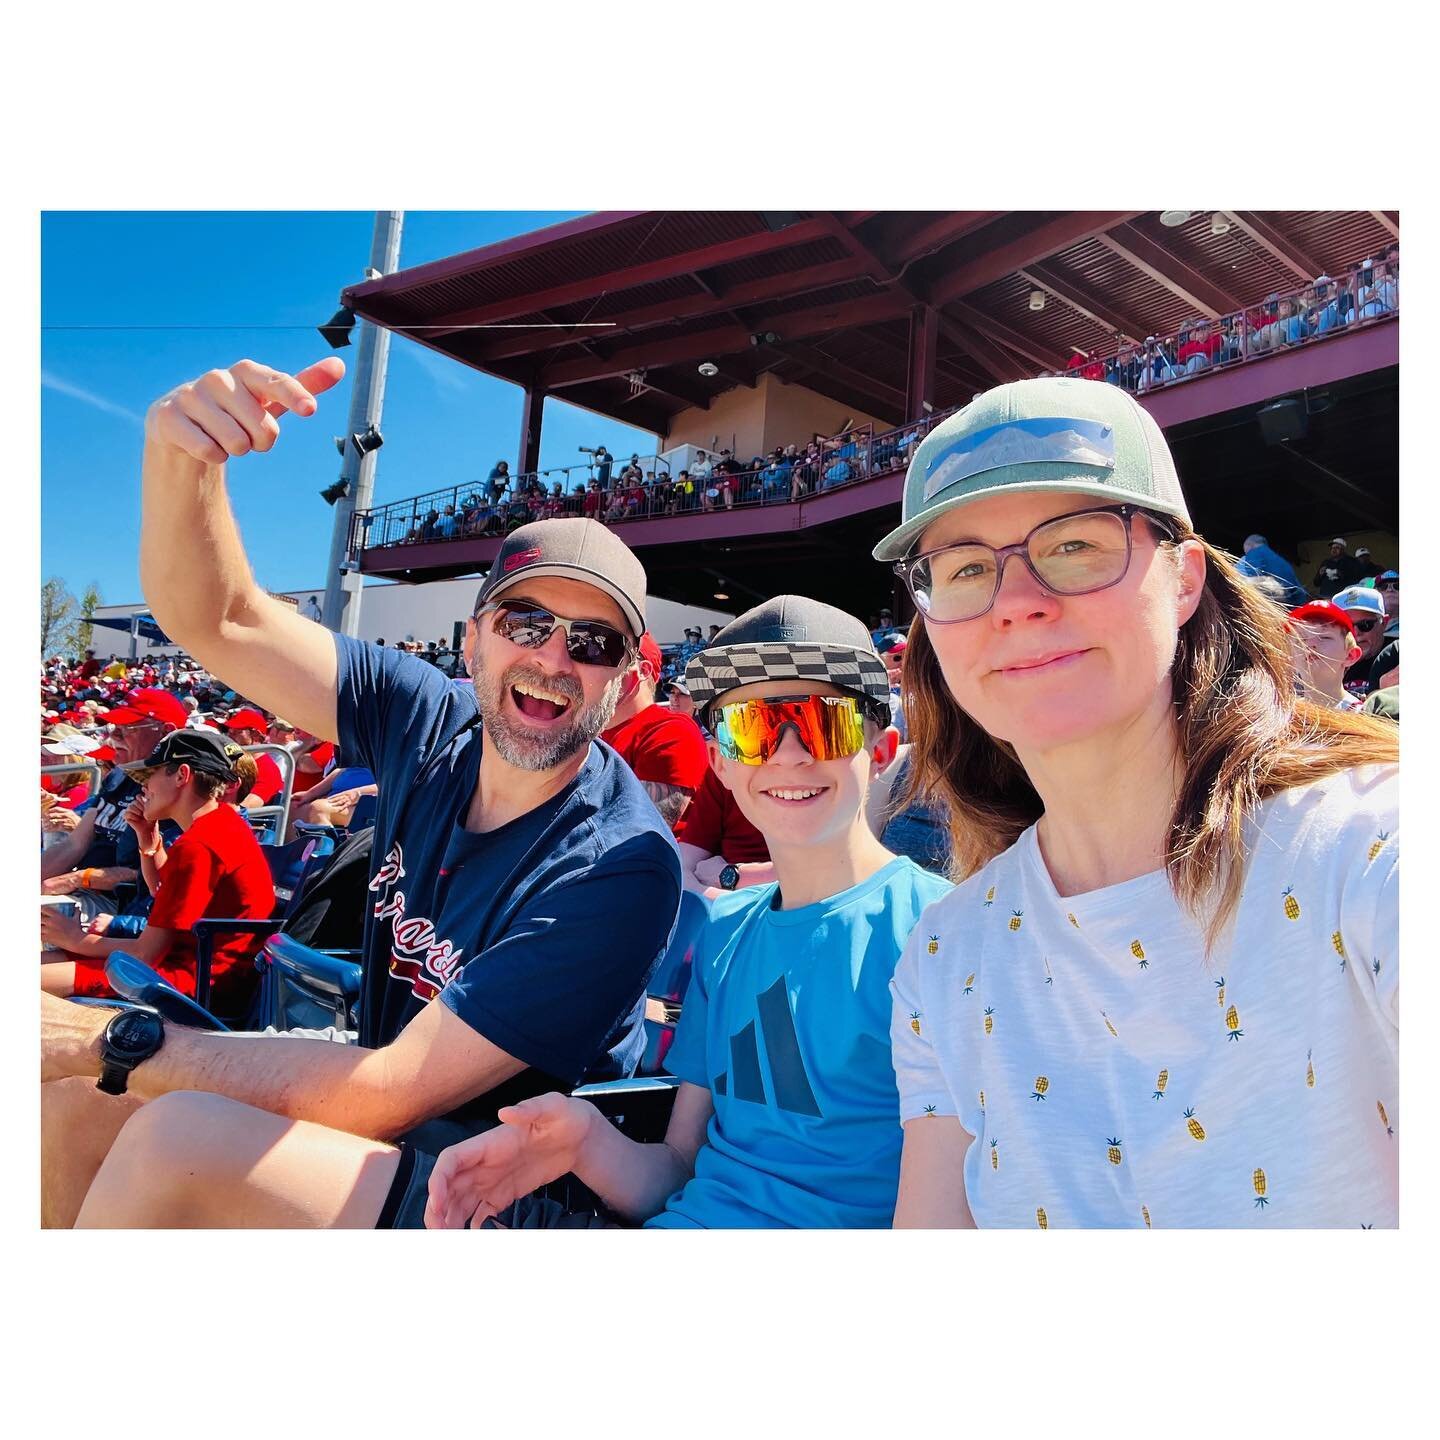 Today I stomped on a guy&rsquo;s foot trying to catch a foul ball that, as it turns out, wasn&rsquo;t really in our vicinity. 🤪 ⚾️ #springtraining #atlantabraves #philliesbaseball